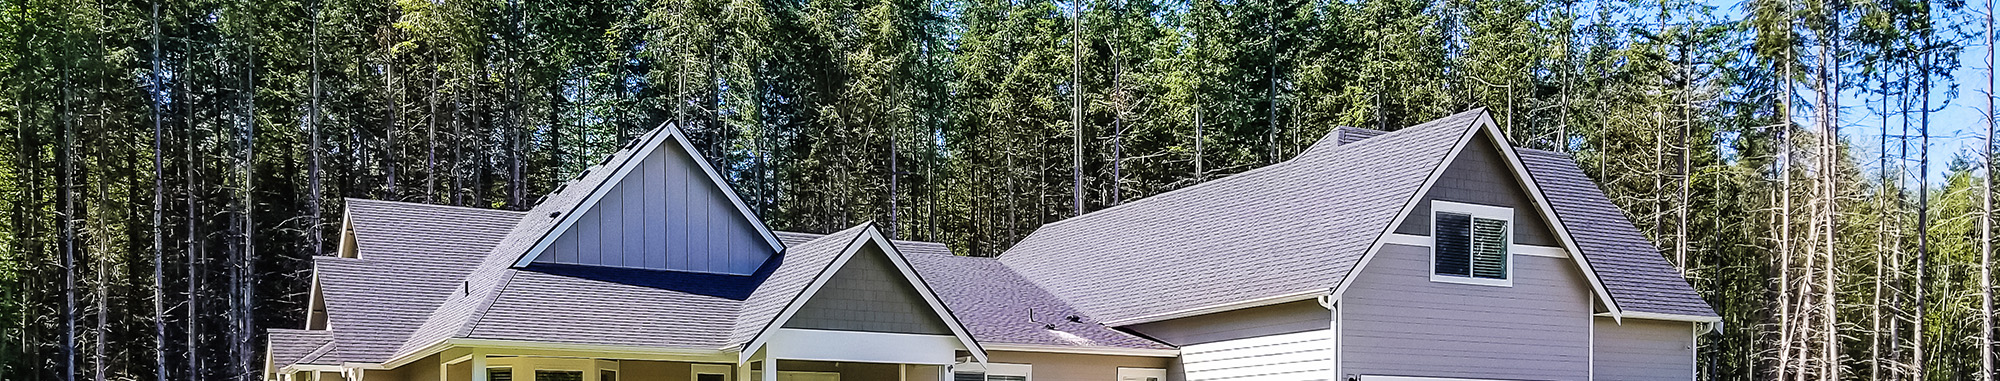 Best roofers in Caledonia, WI